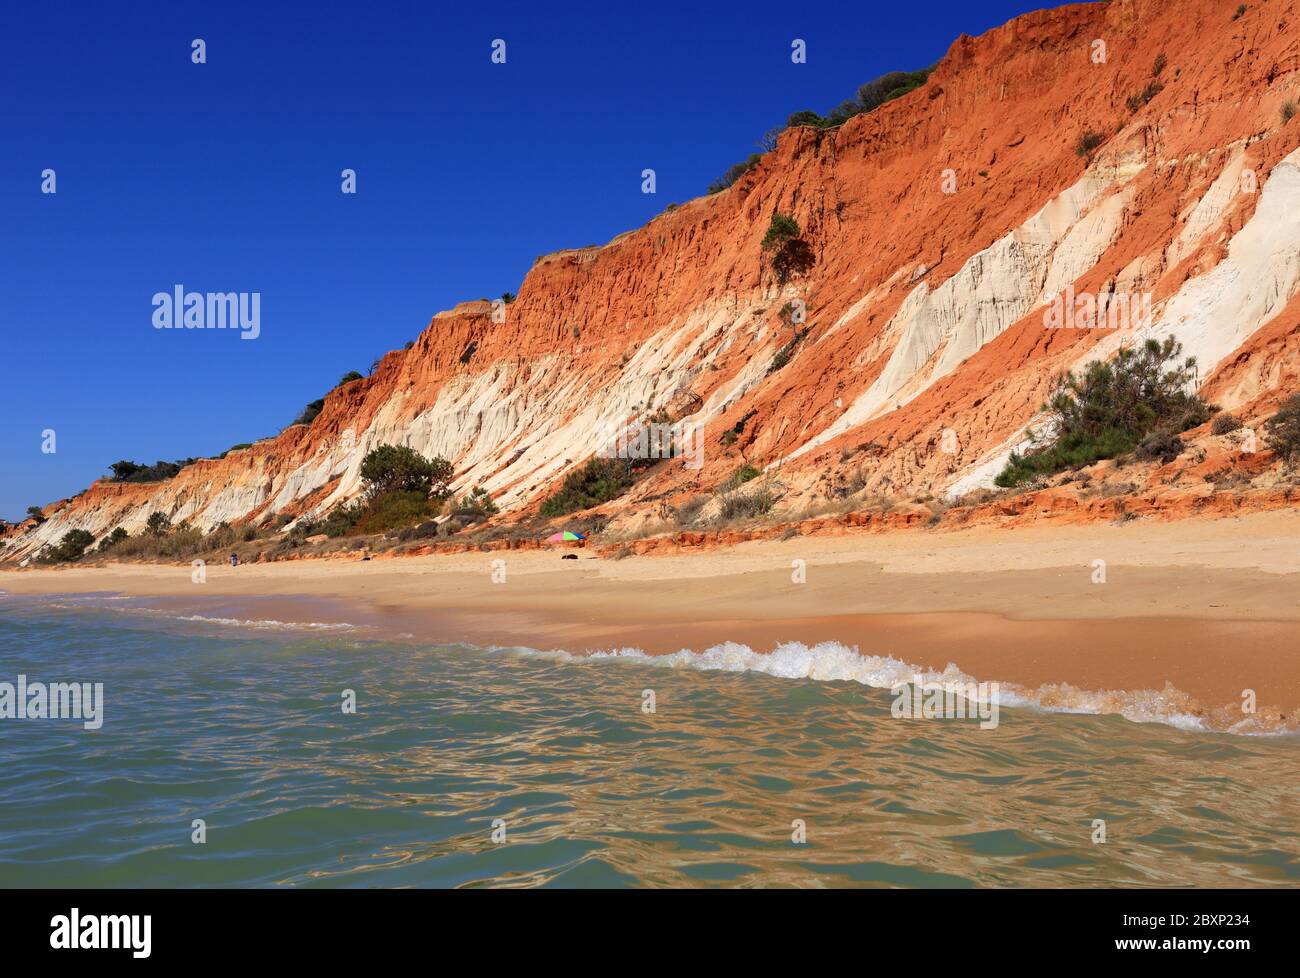 Portugal, Algarve, Albufeira, Olhos D'Agua Beach on the Atlantic Coast. Beautiful sandstone cliff formations and pristine deserted golden sandy beach. Stock Photo